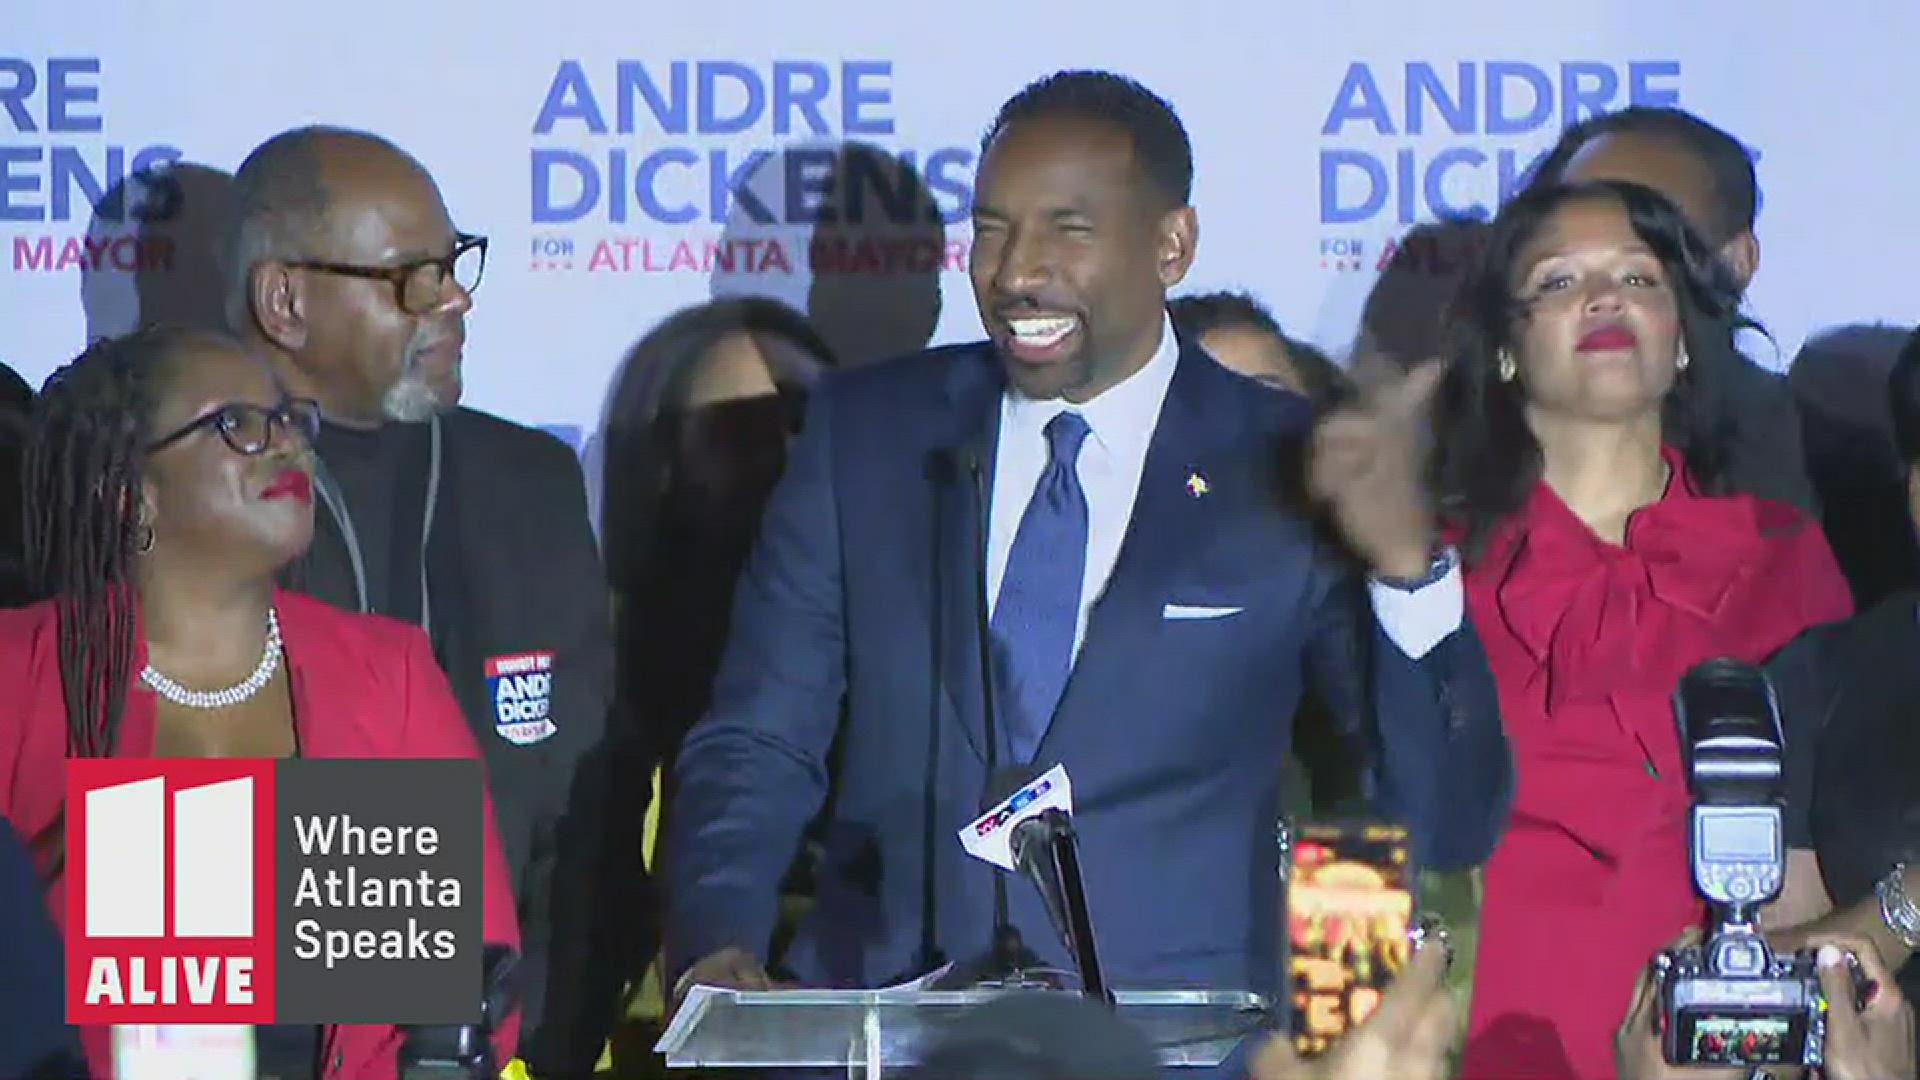 In his victory speech after being declared the winner of Atlanta's mayoral election, Andre Dickens thanked his mom.